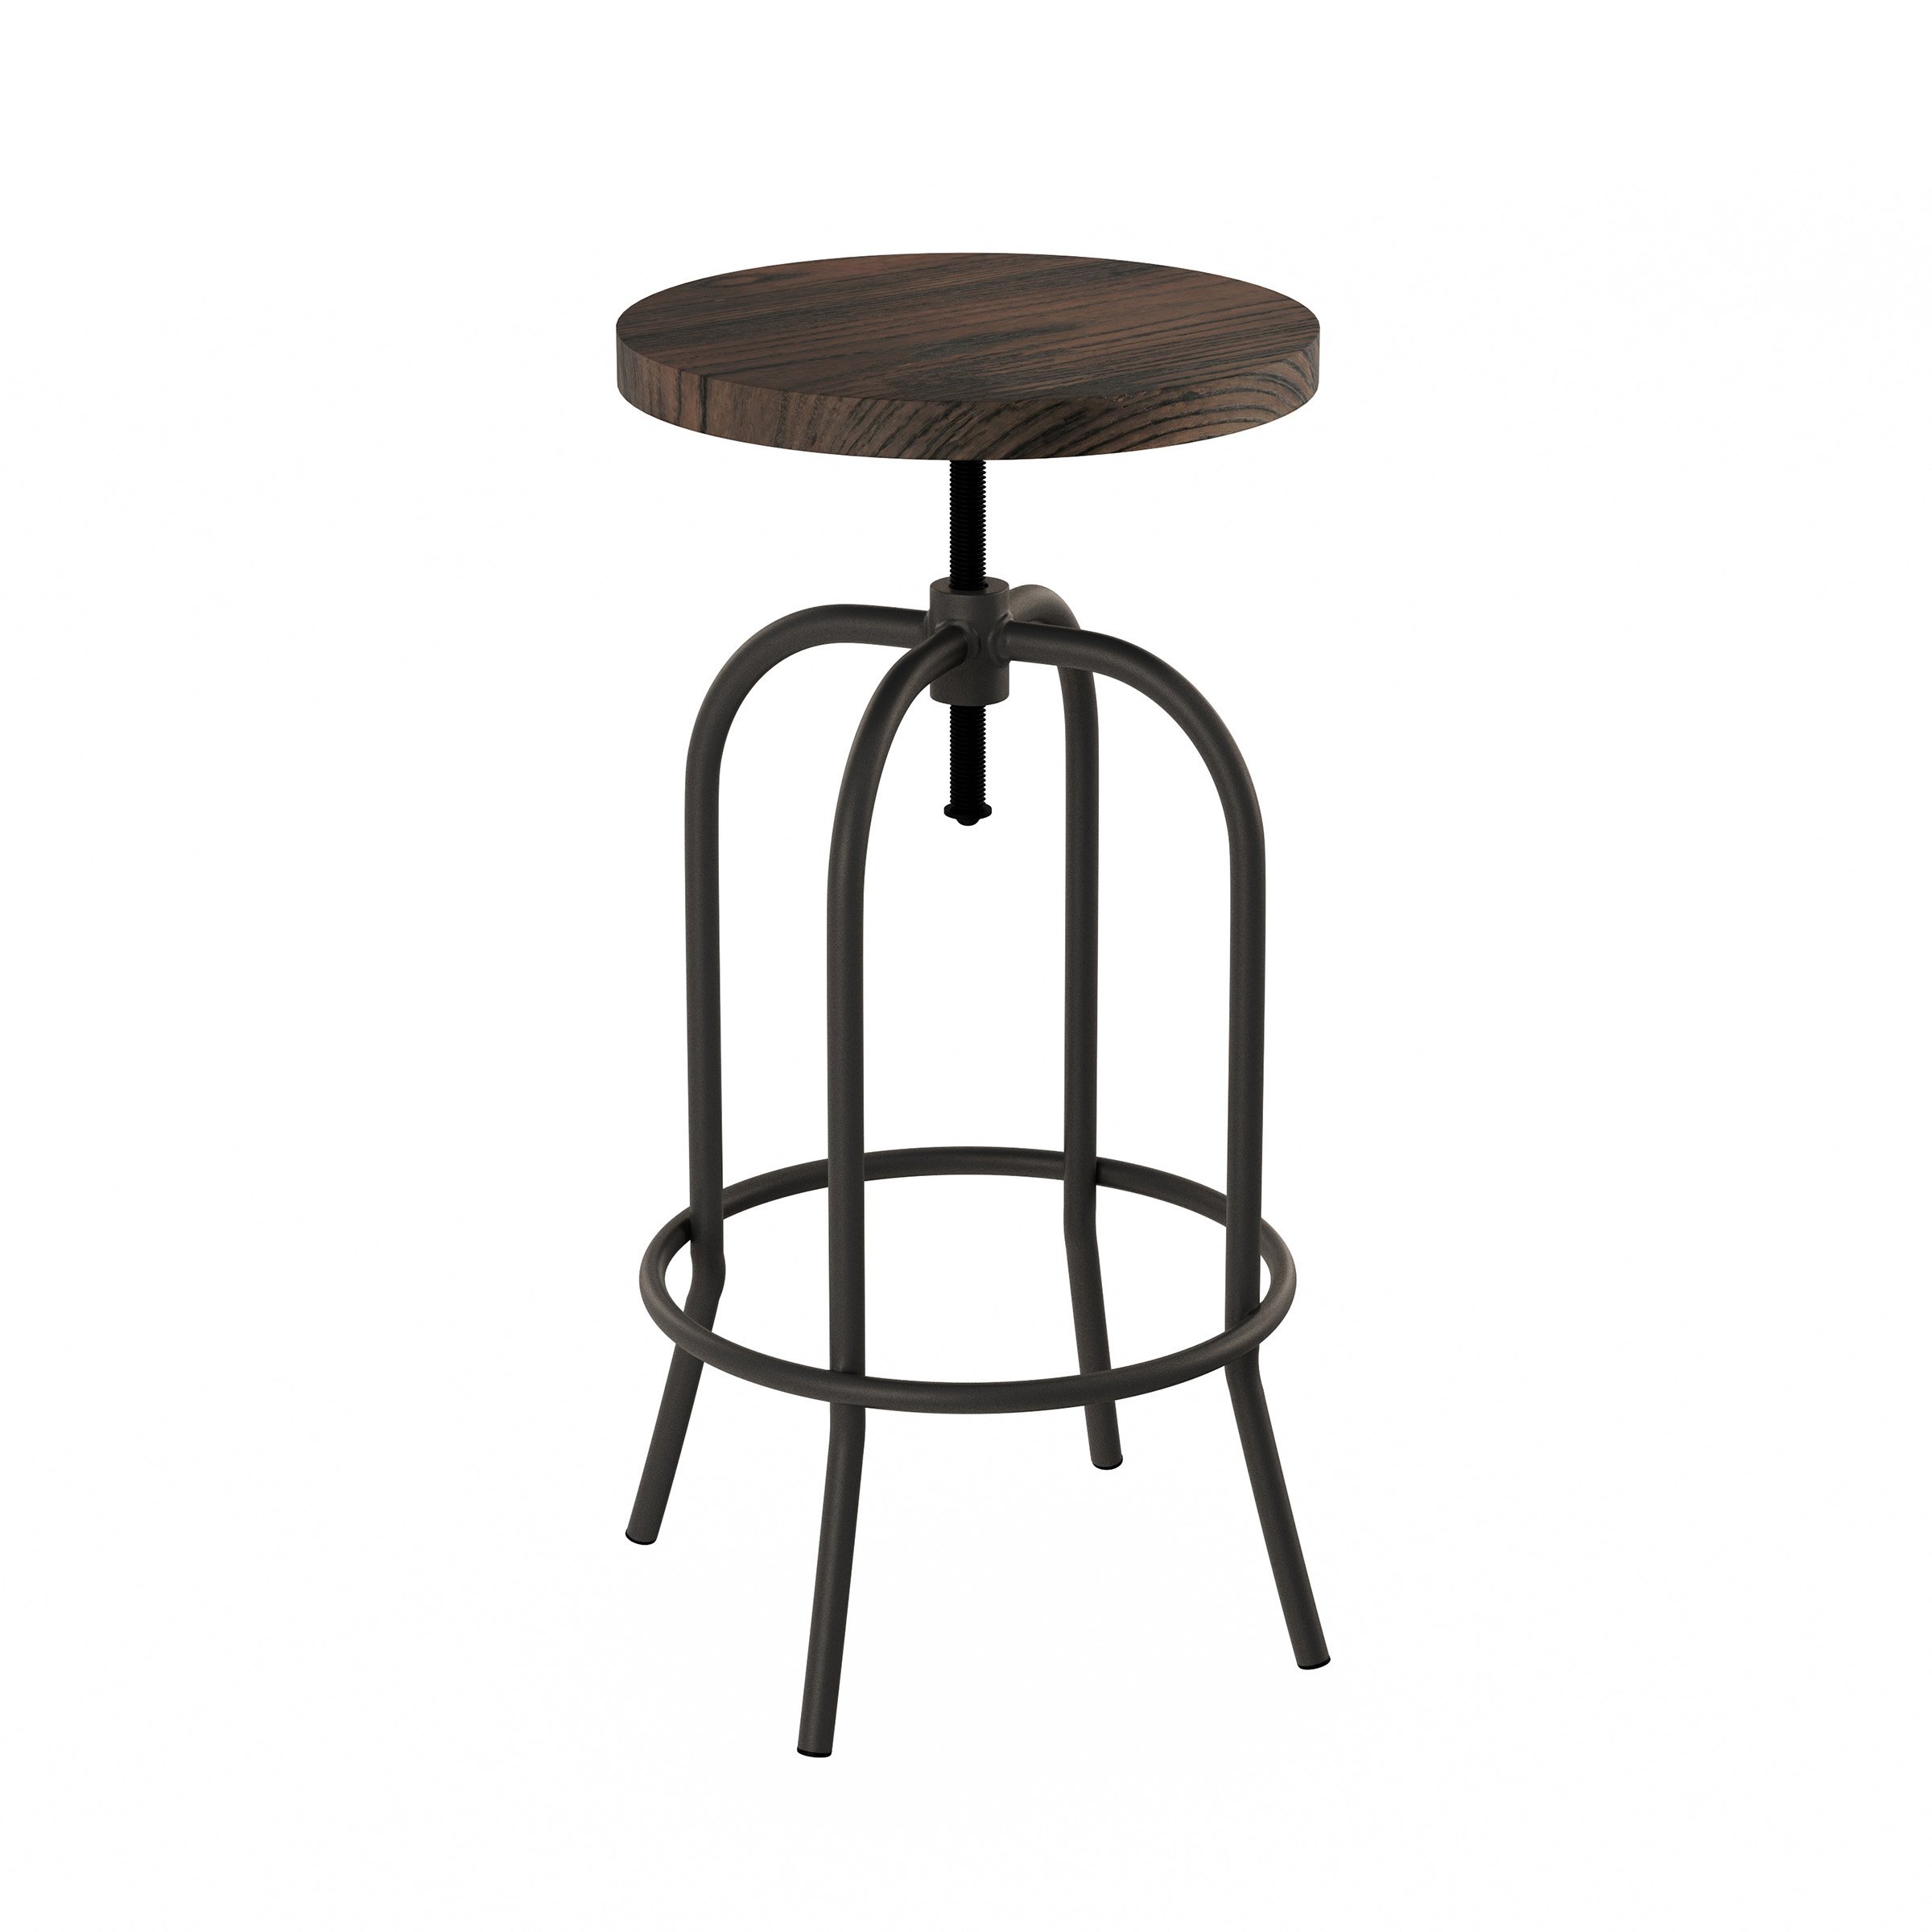 Swivel Bar Stool-Adjustable Backless Bar Or Counter Height Kitchen Stool-Metal With Elm Wood Seat